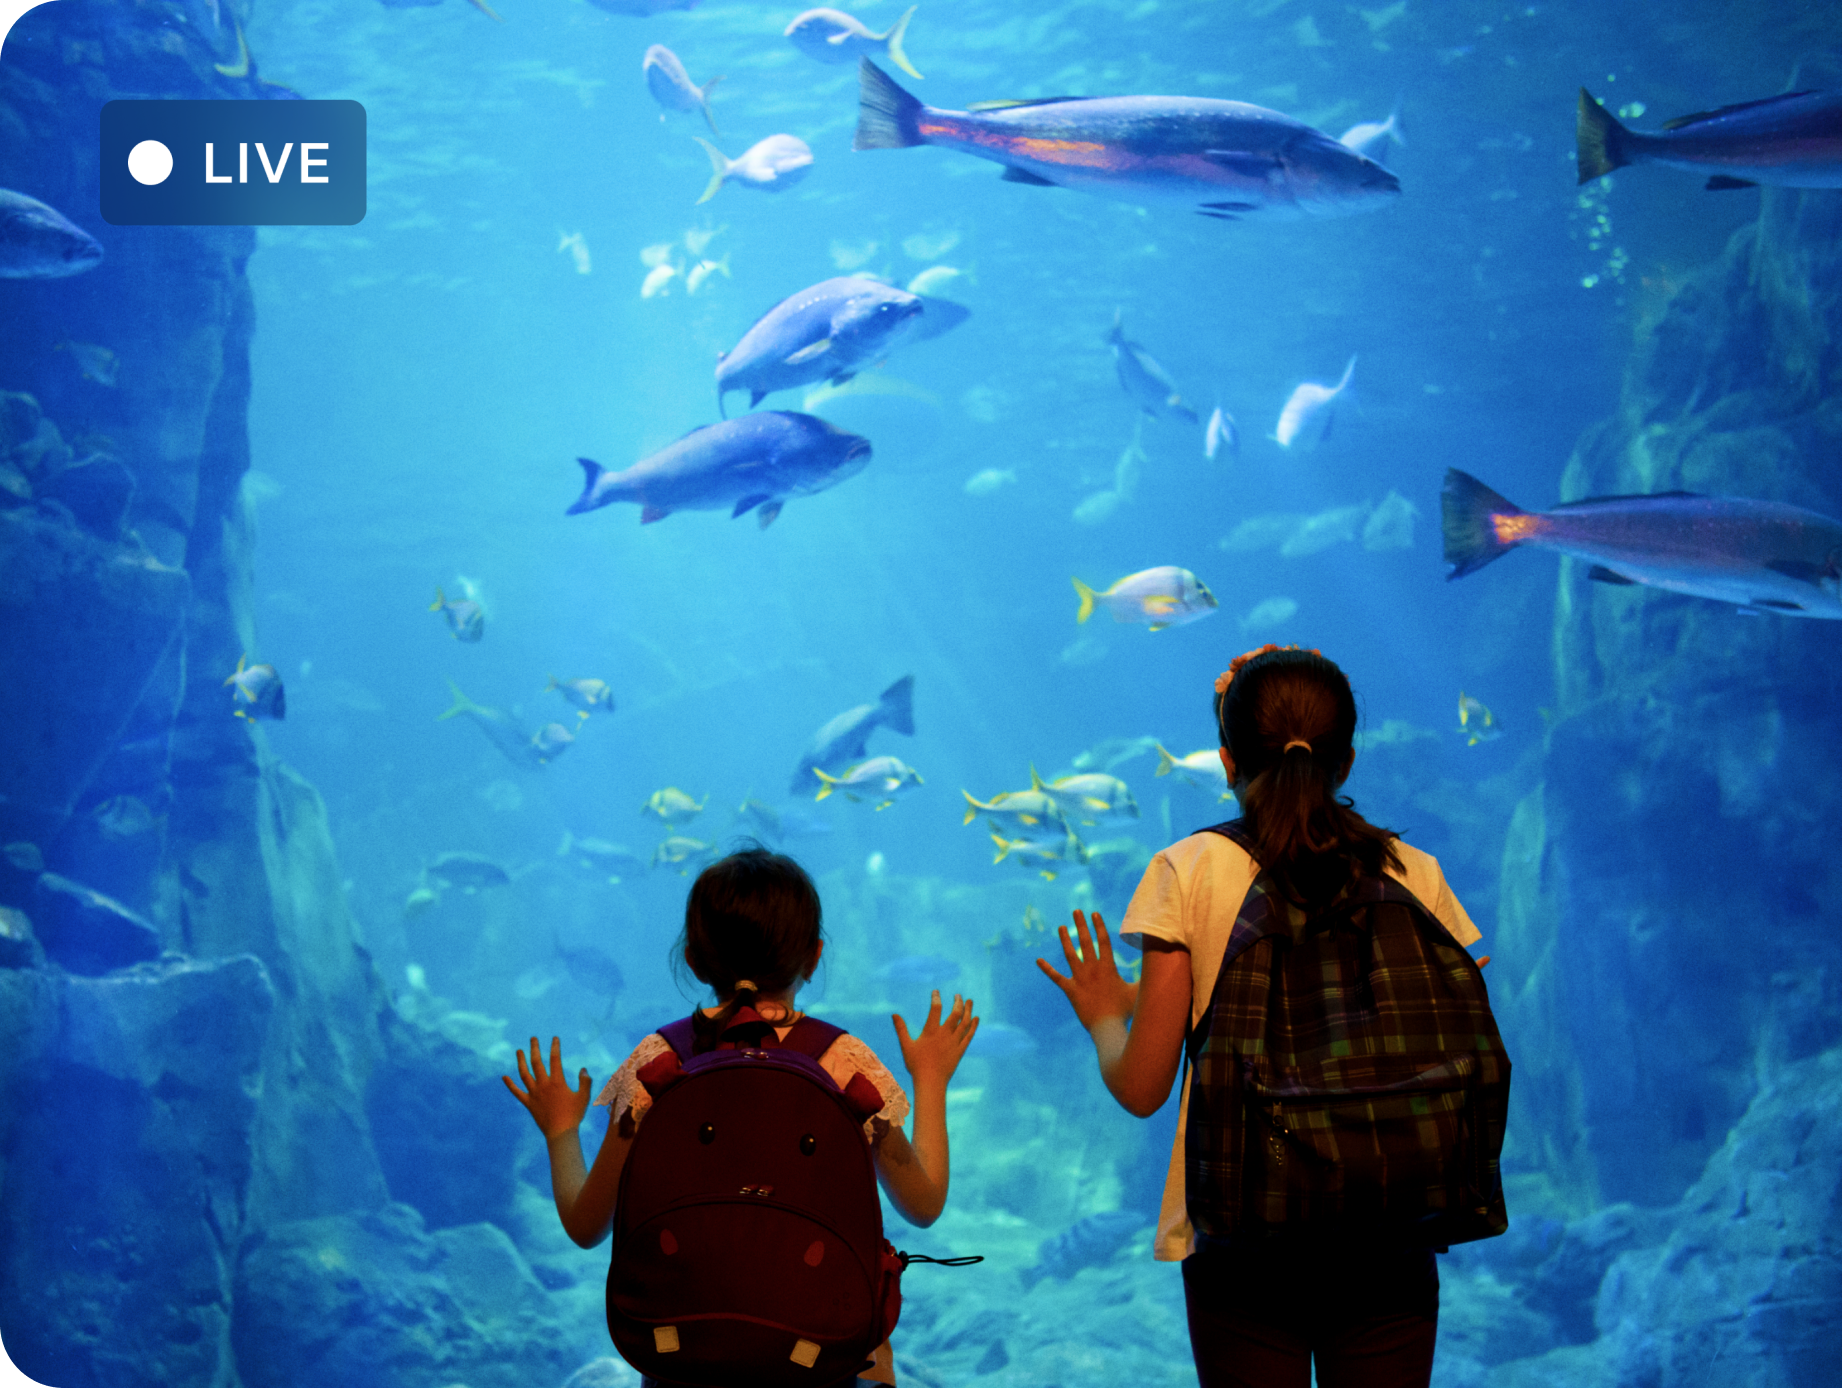 Live streaming a learning experience at the aquarium